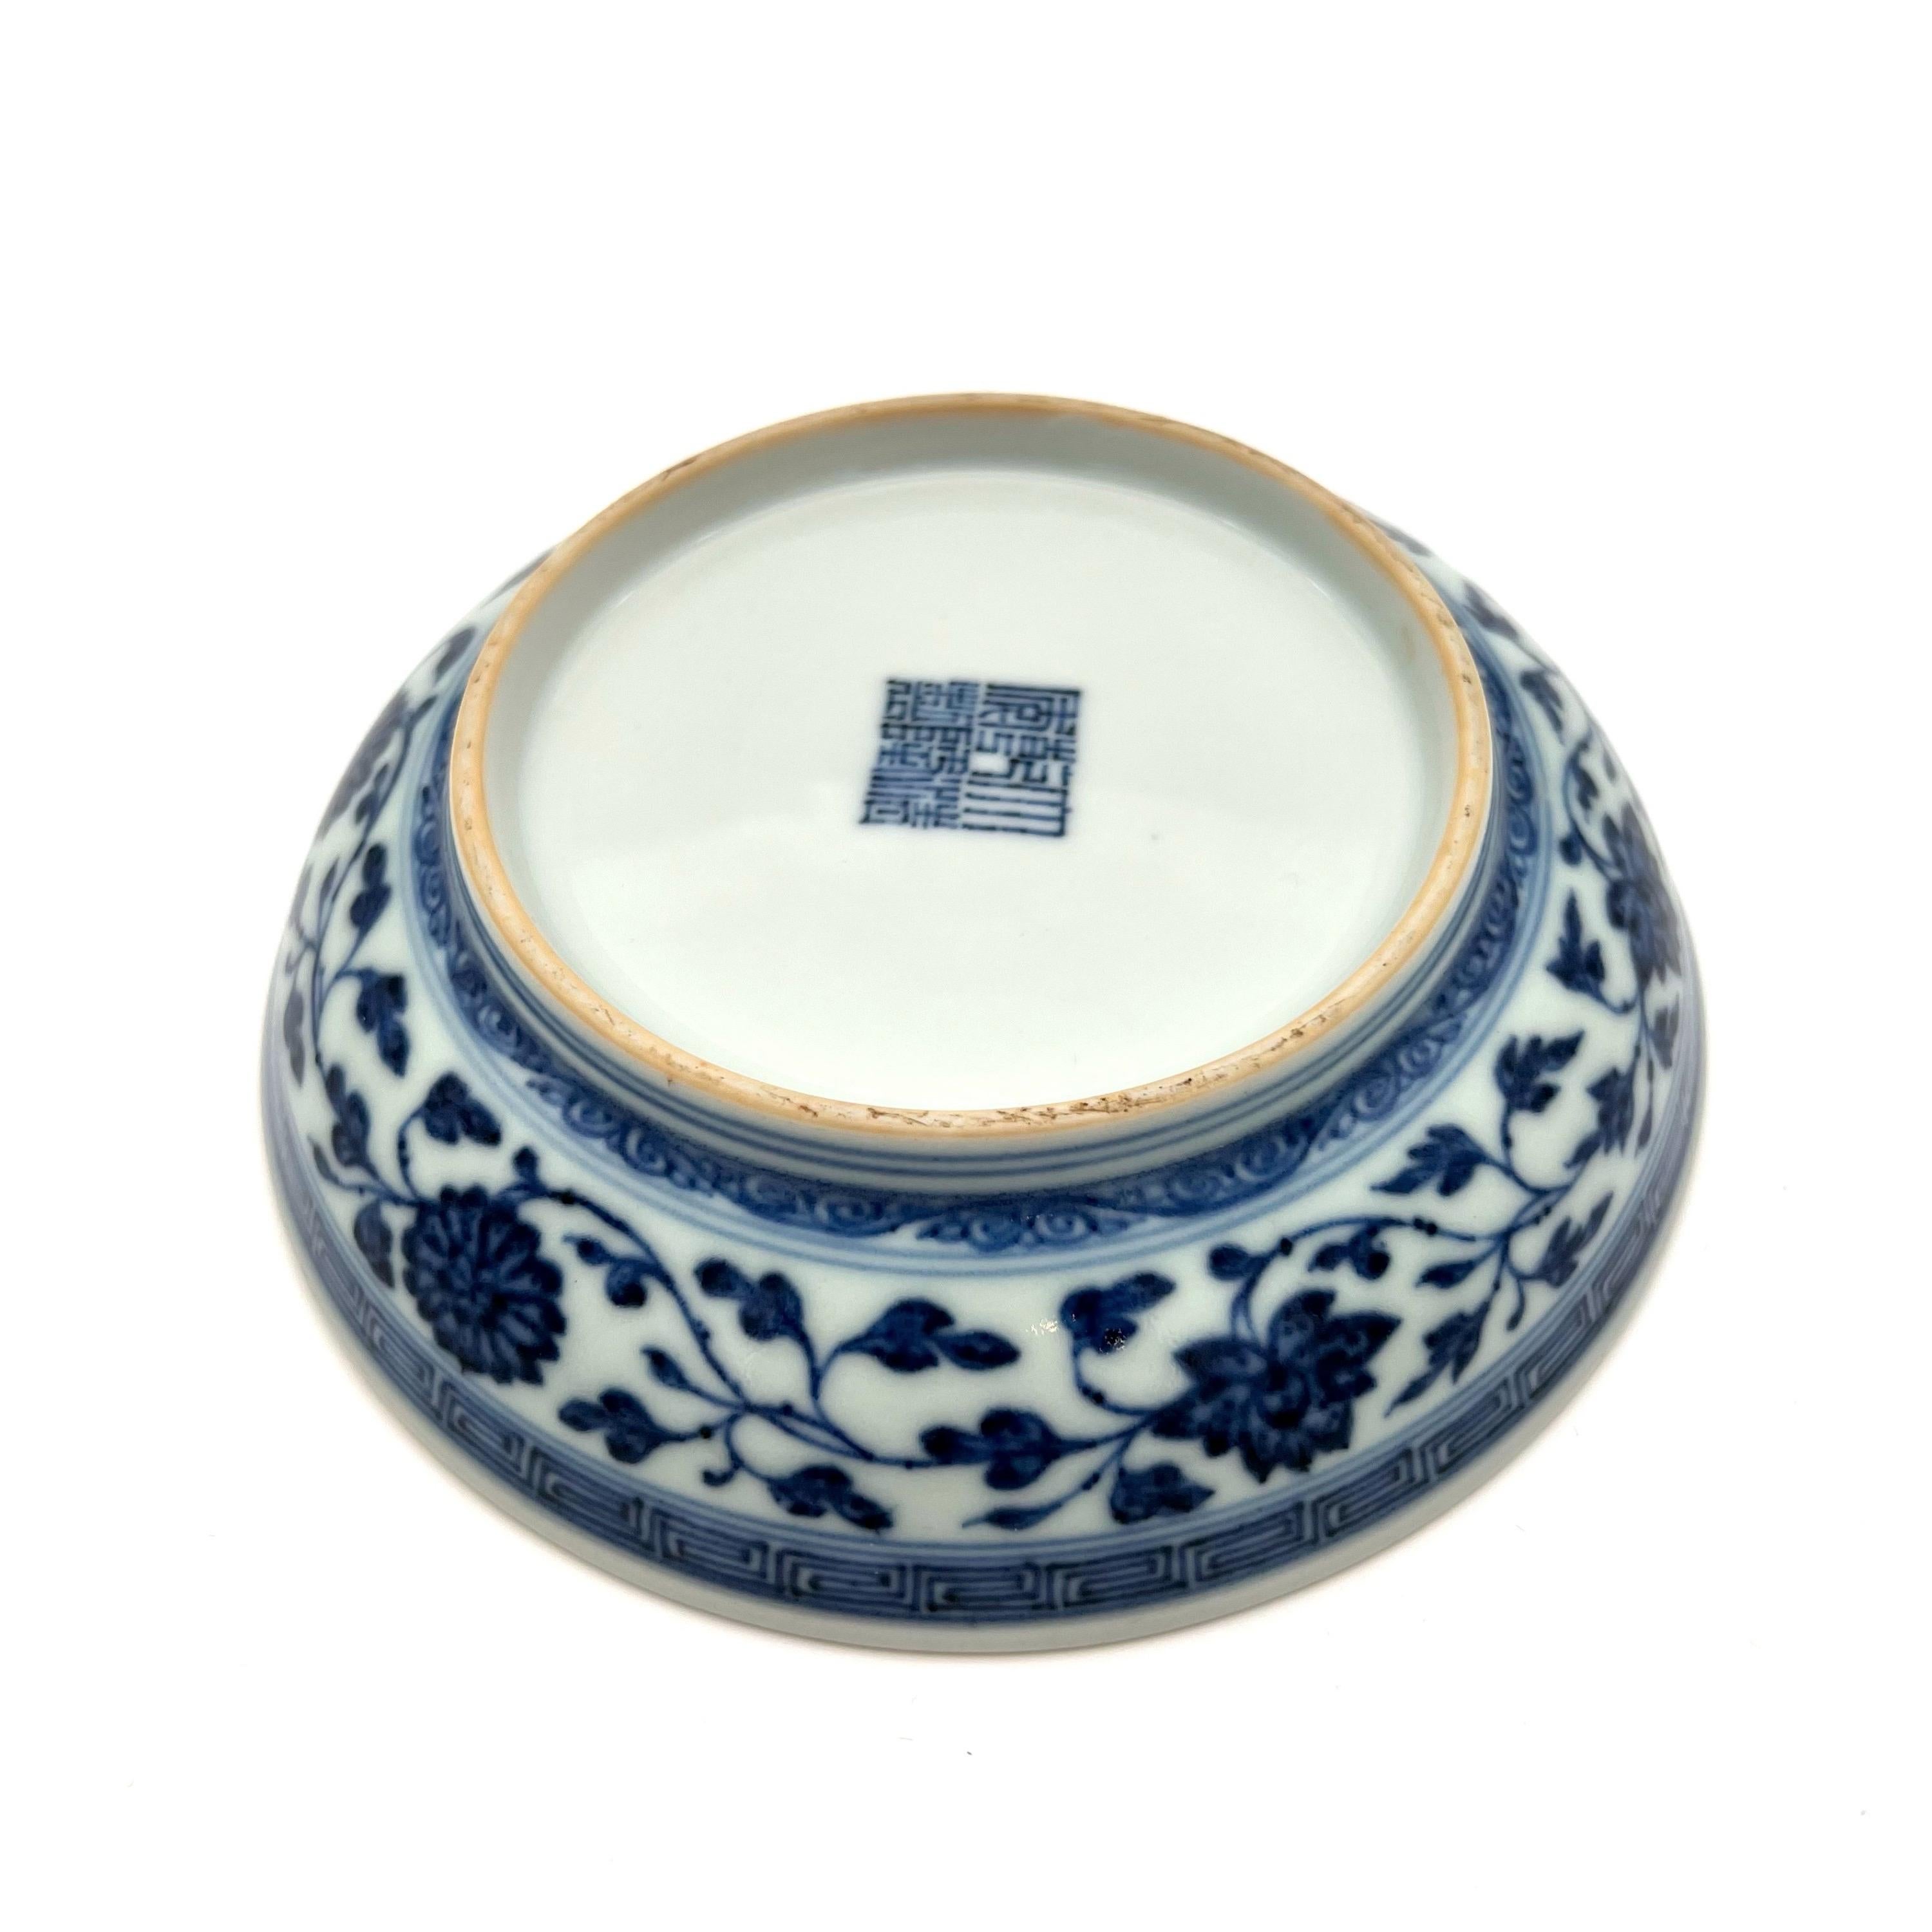 Chinese Blue and White Ming-Style Dish, Qianlong Mark and Period, China 1736 - 1795